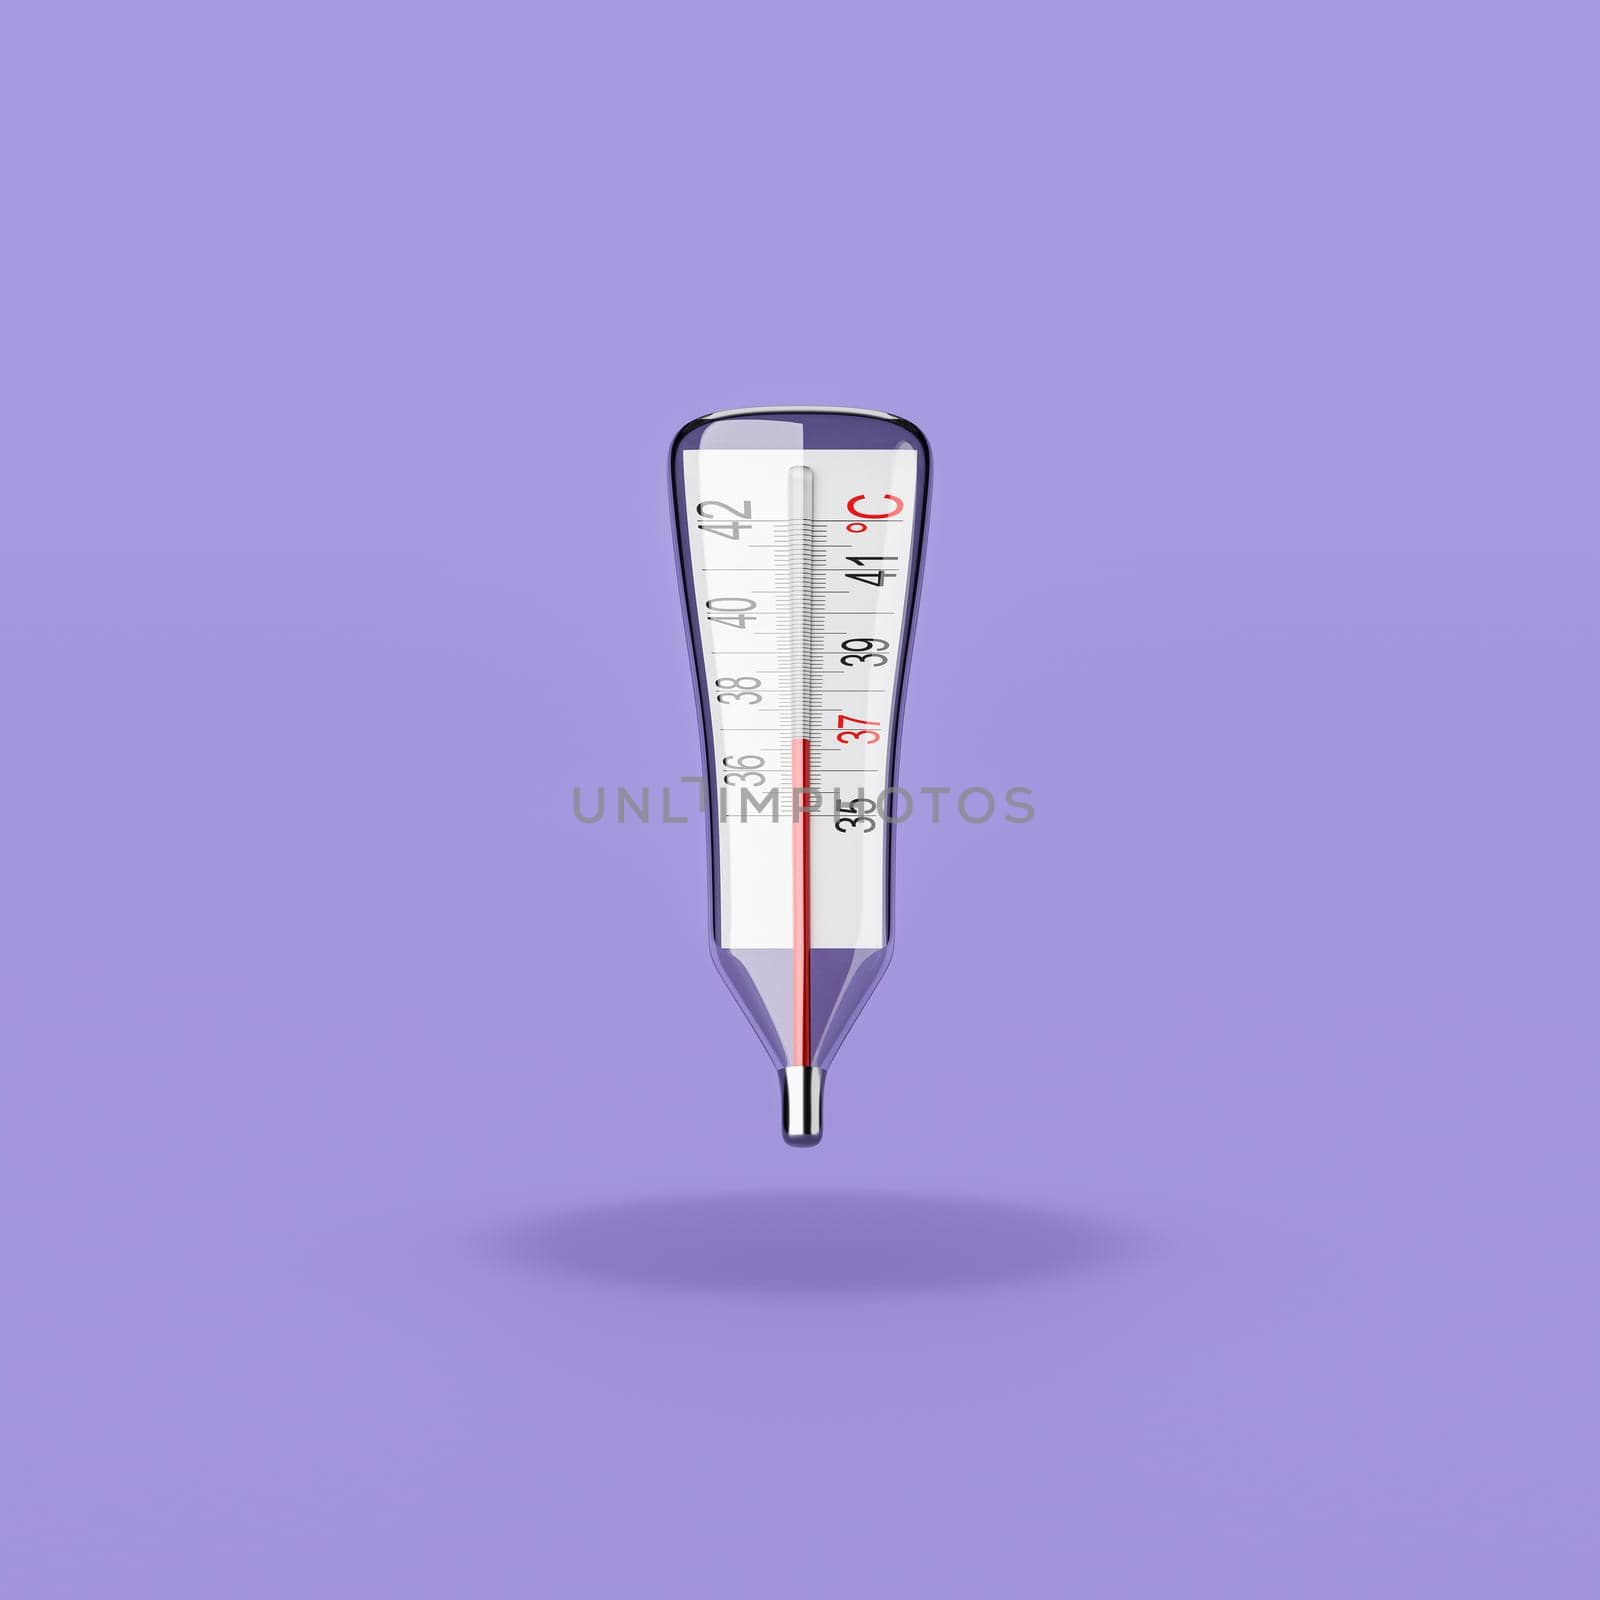 Funny Clinical Thermometer on Flat Purple Background with Shadow 3D Illustration